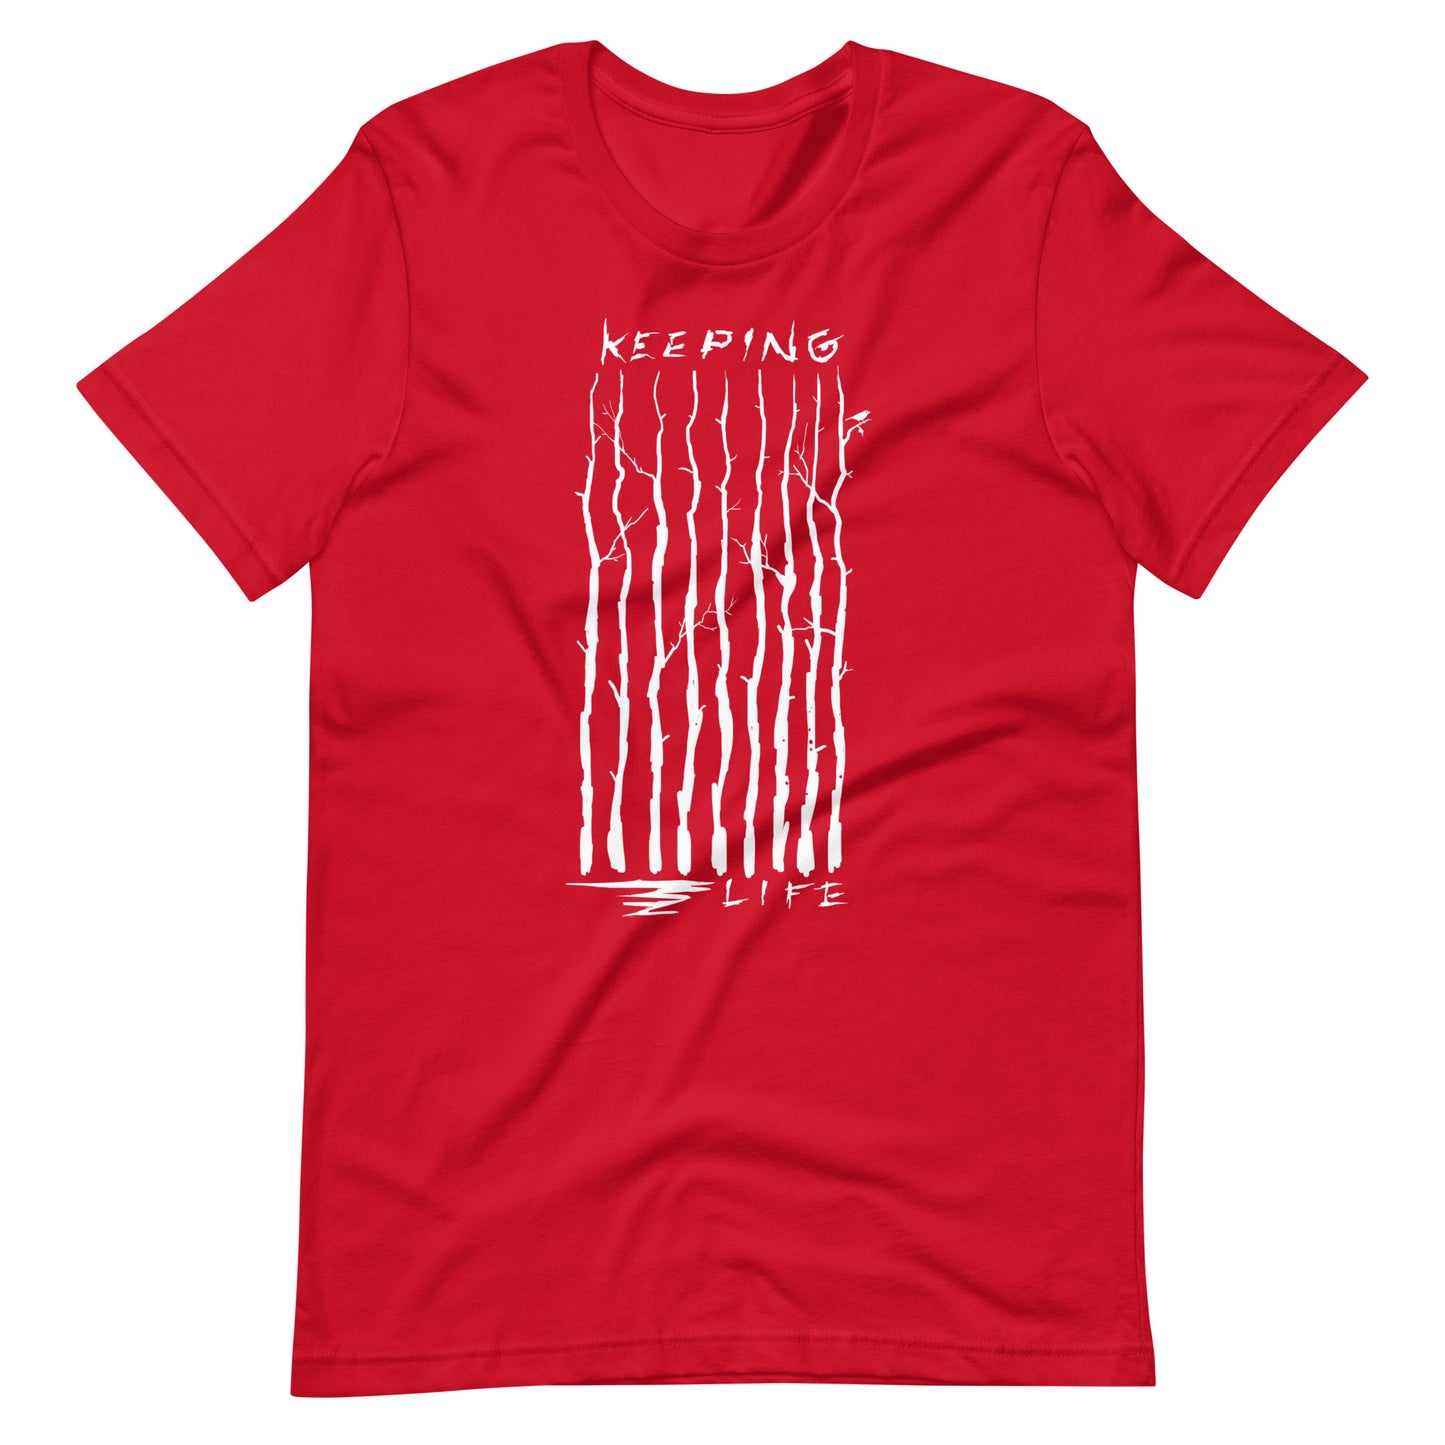 Keeping Lift - Men's t-shirt - Red Front